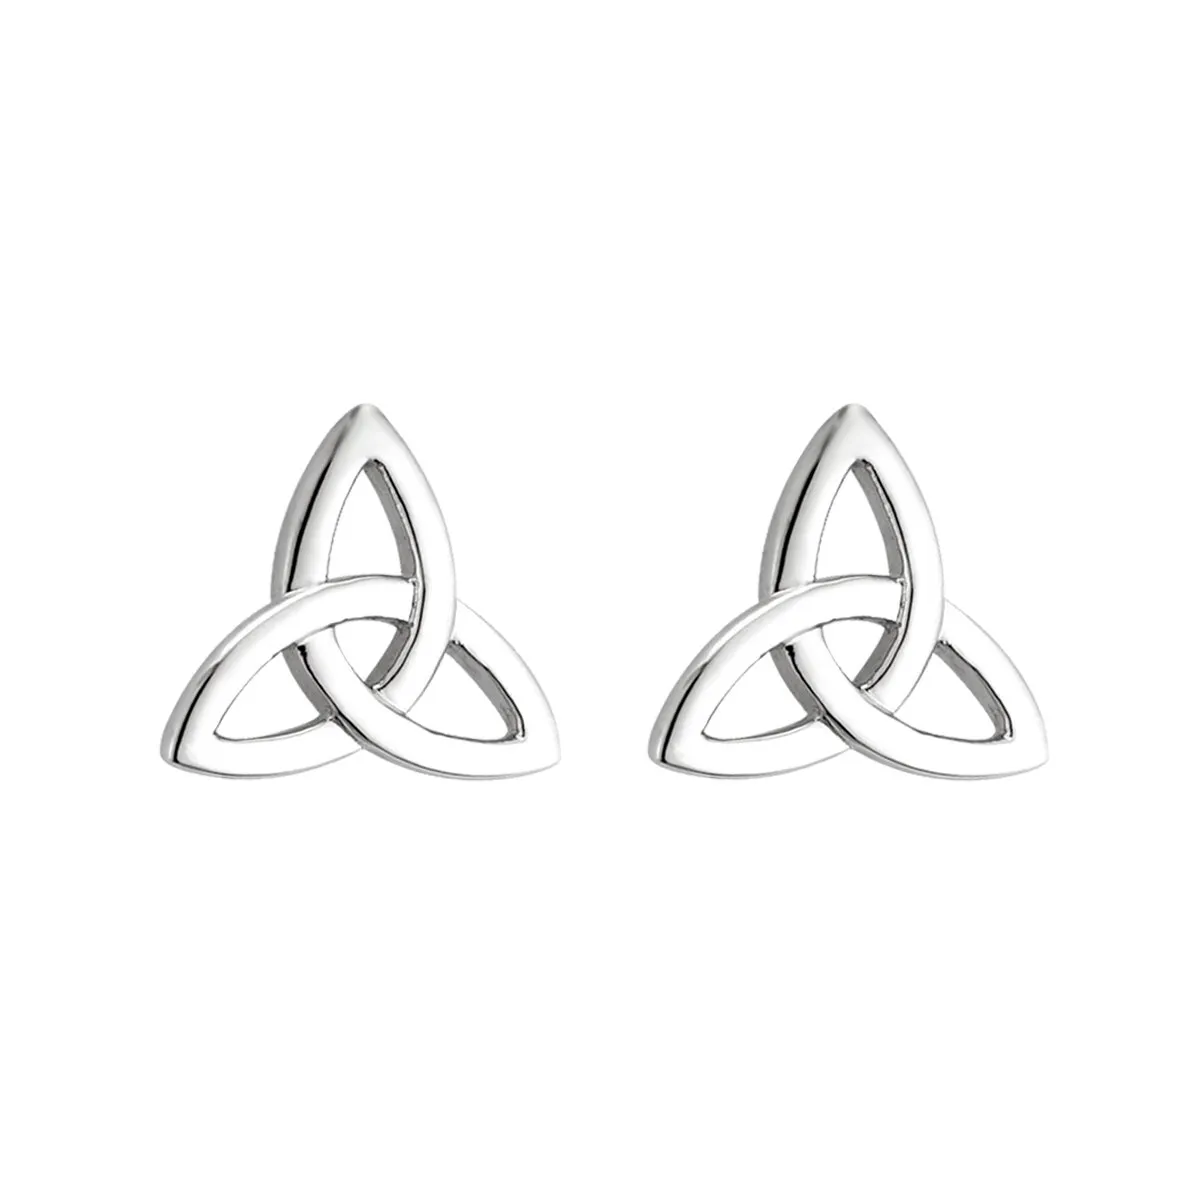 White Gold Trinity Knot Stud Earrings0